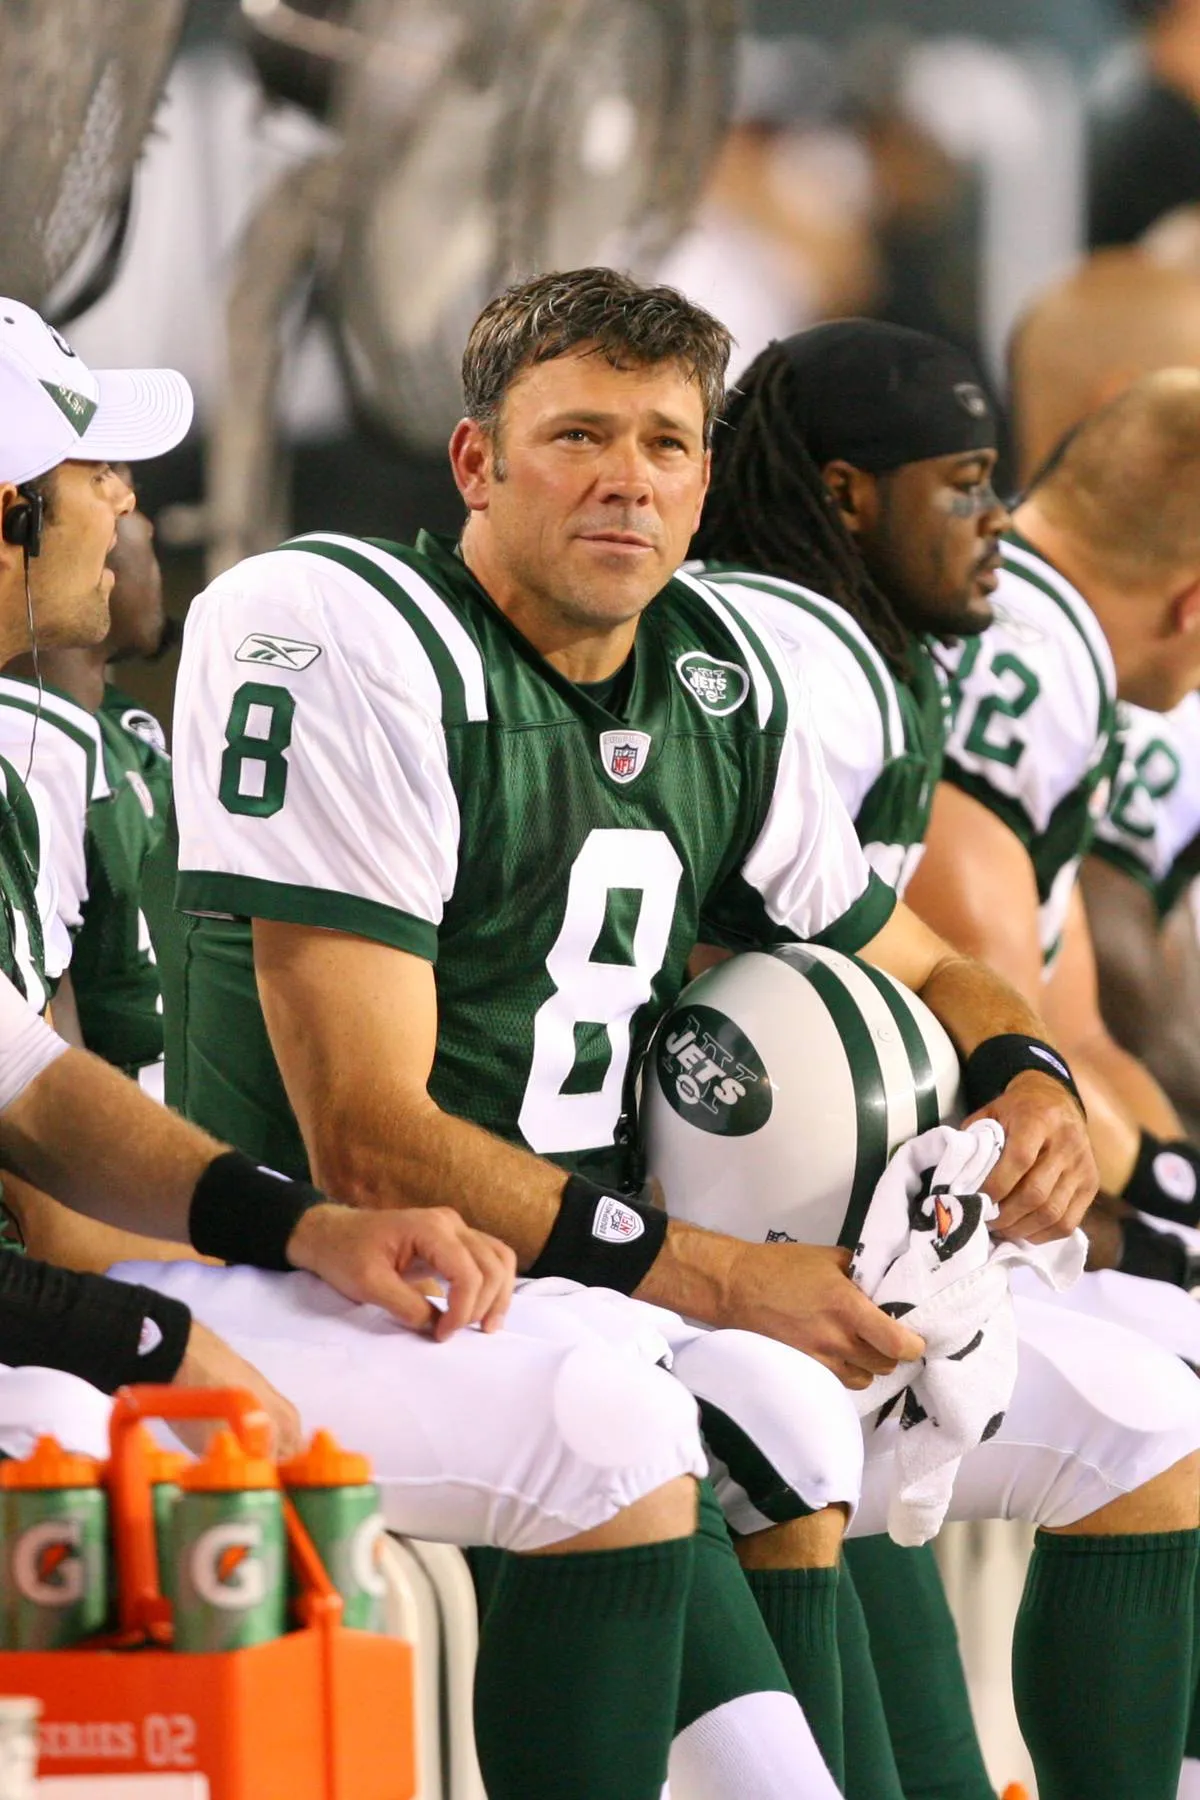 Quarterback Mark Brunell #8 of the New York Jets sits on the bench during a pre-season game against the Philadelphia Eagles on September 2, 2010 at Lincoln Financial Field in Philadelphia, Pennsylvania